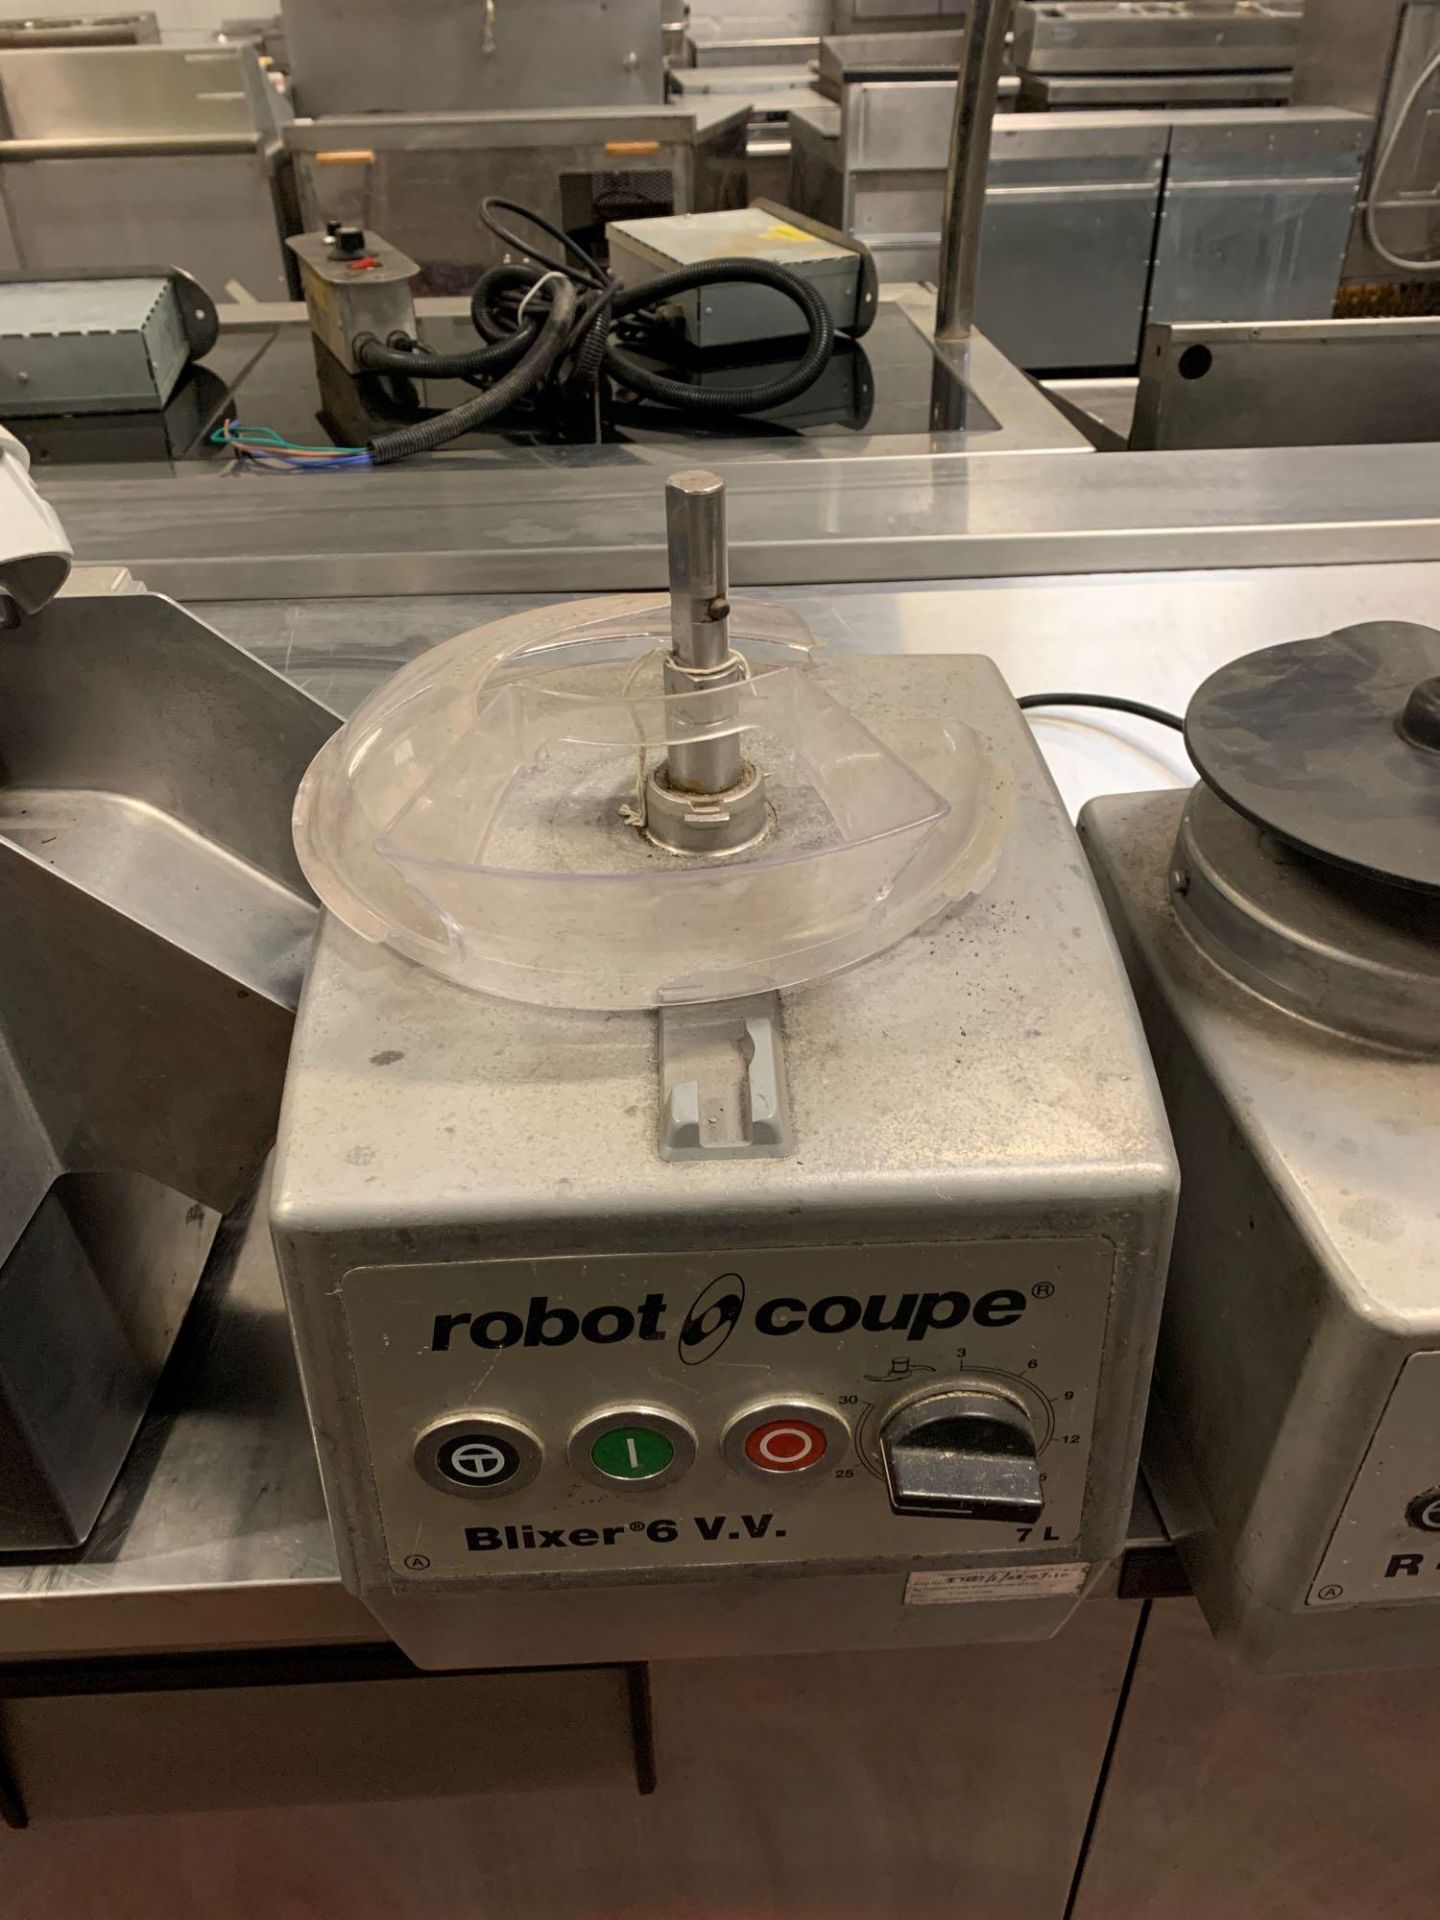 Base units for Robot Coupe- CL50 Blixer 6 V.V R401 and various attachments. - Image 3 of 5